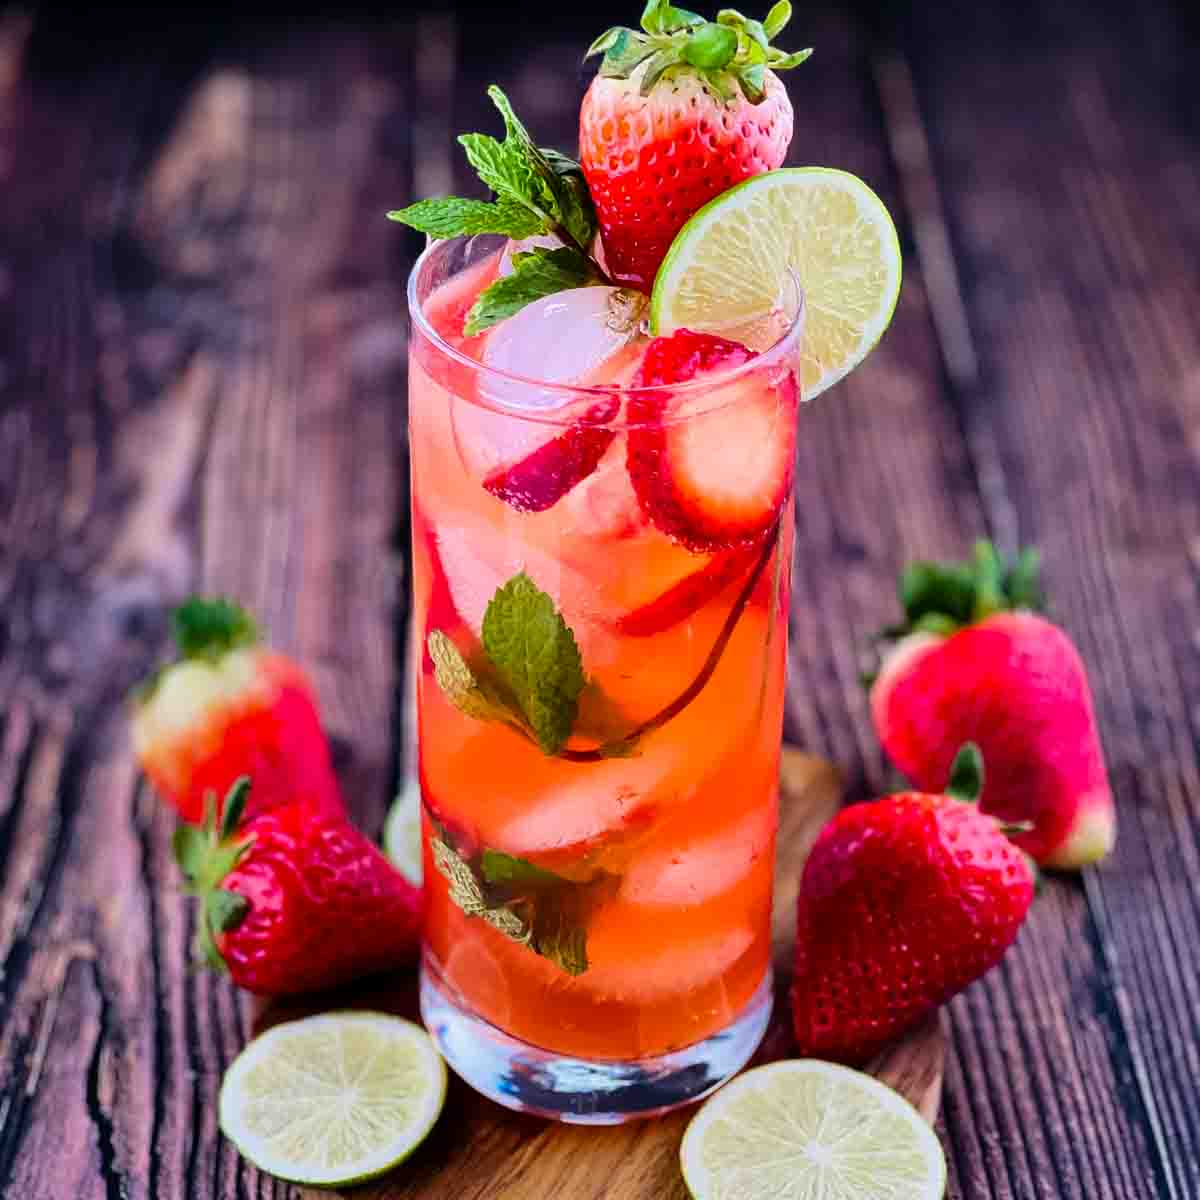 A highball glass of a strawberry mojito garnished with fresh strawberries and lime wheels.